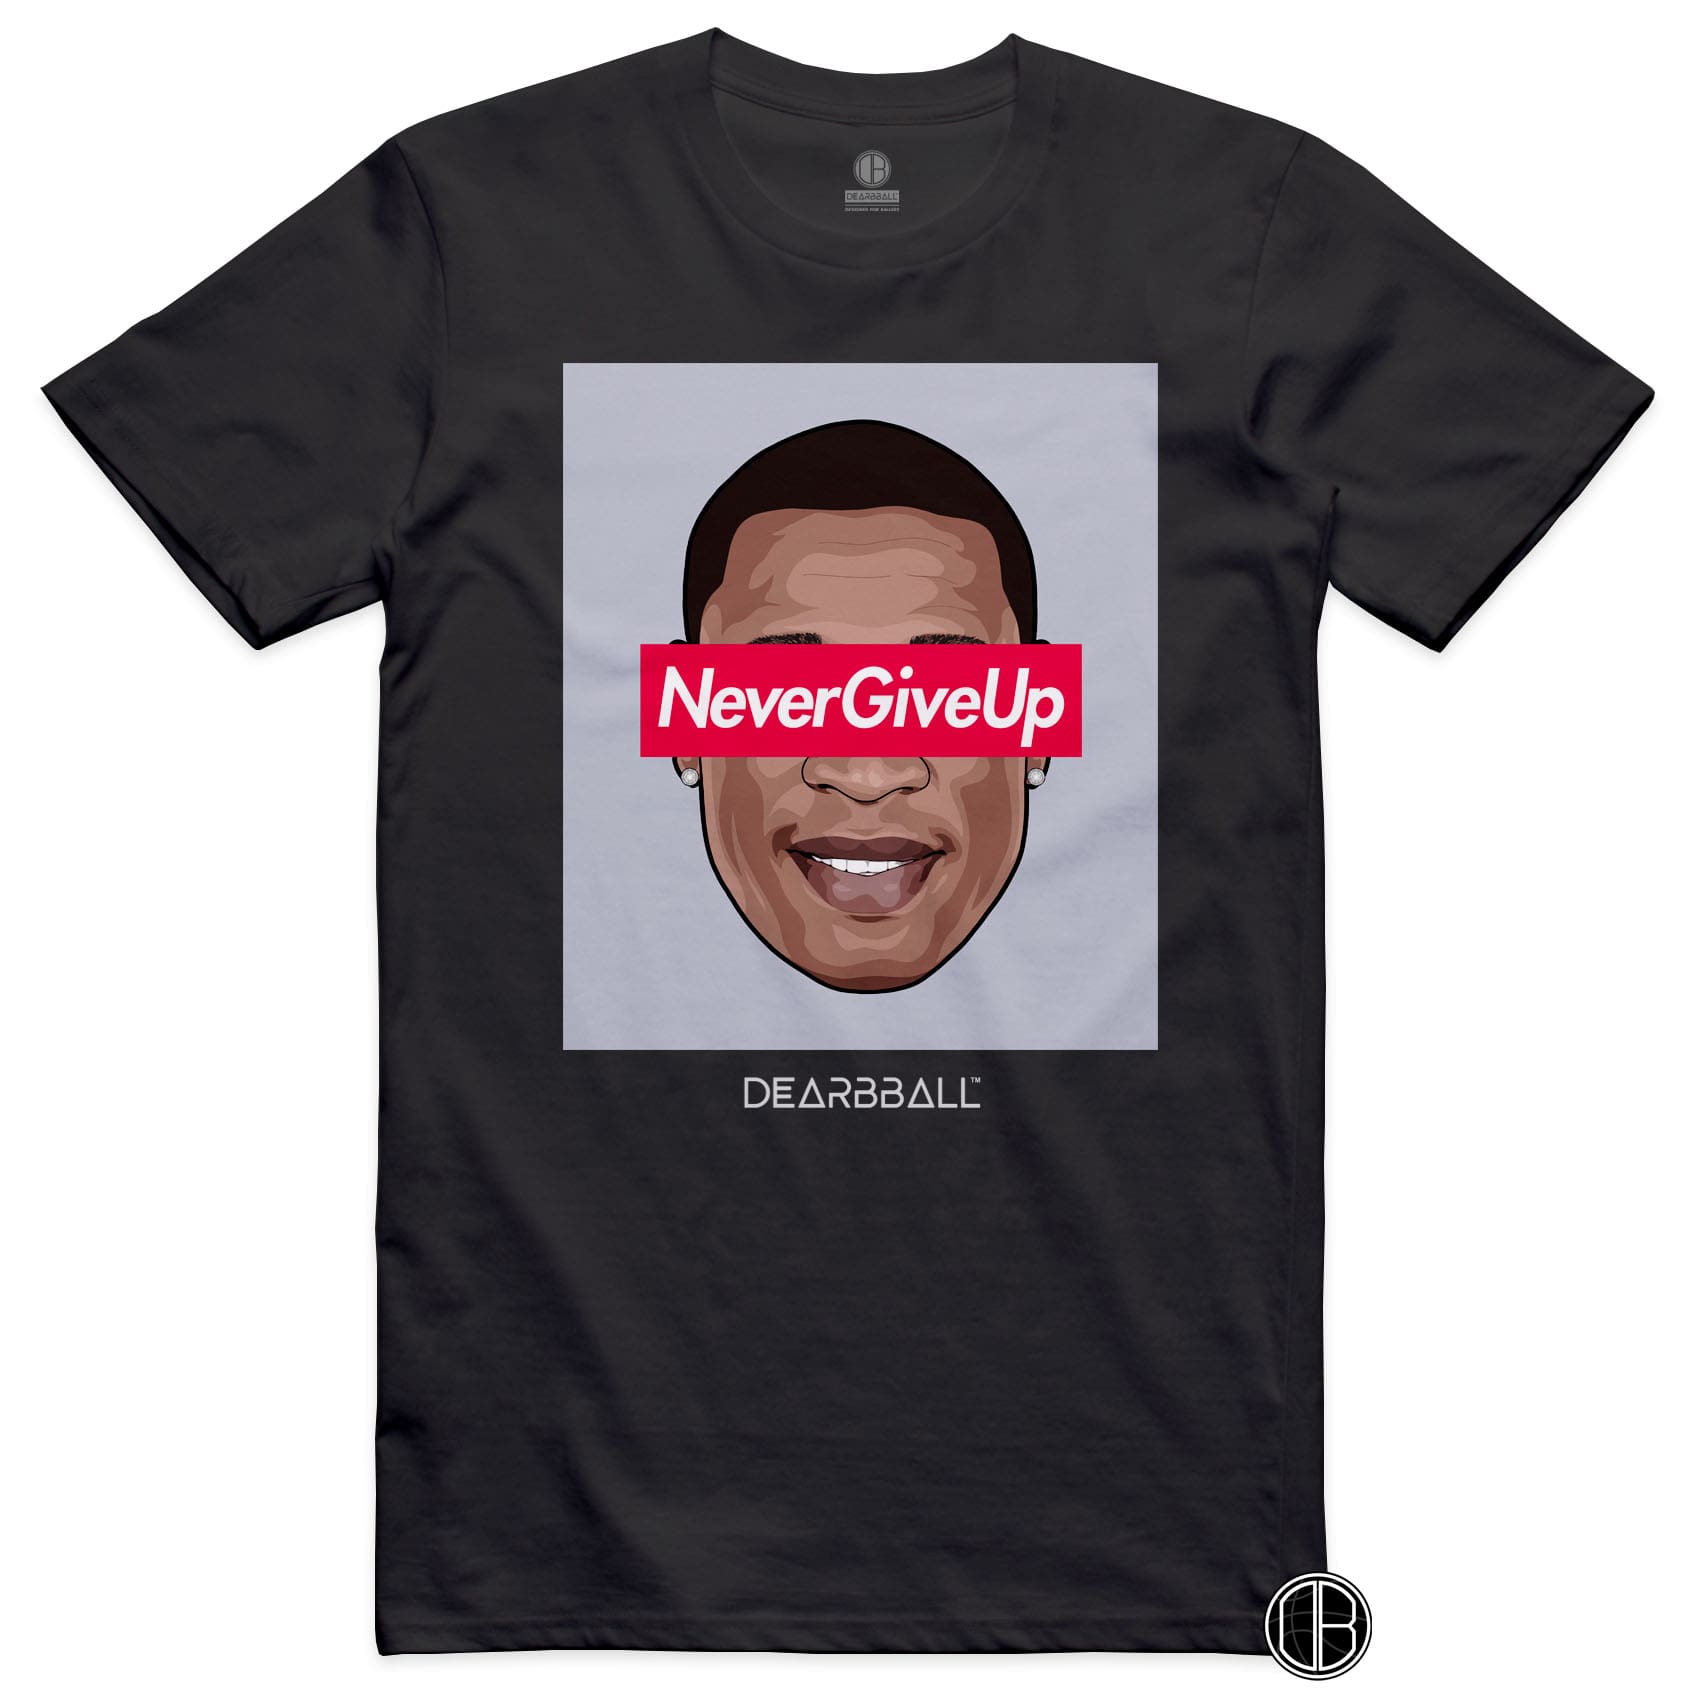 DearBBall T-Shirt - Never Give UP Edition